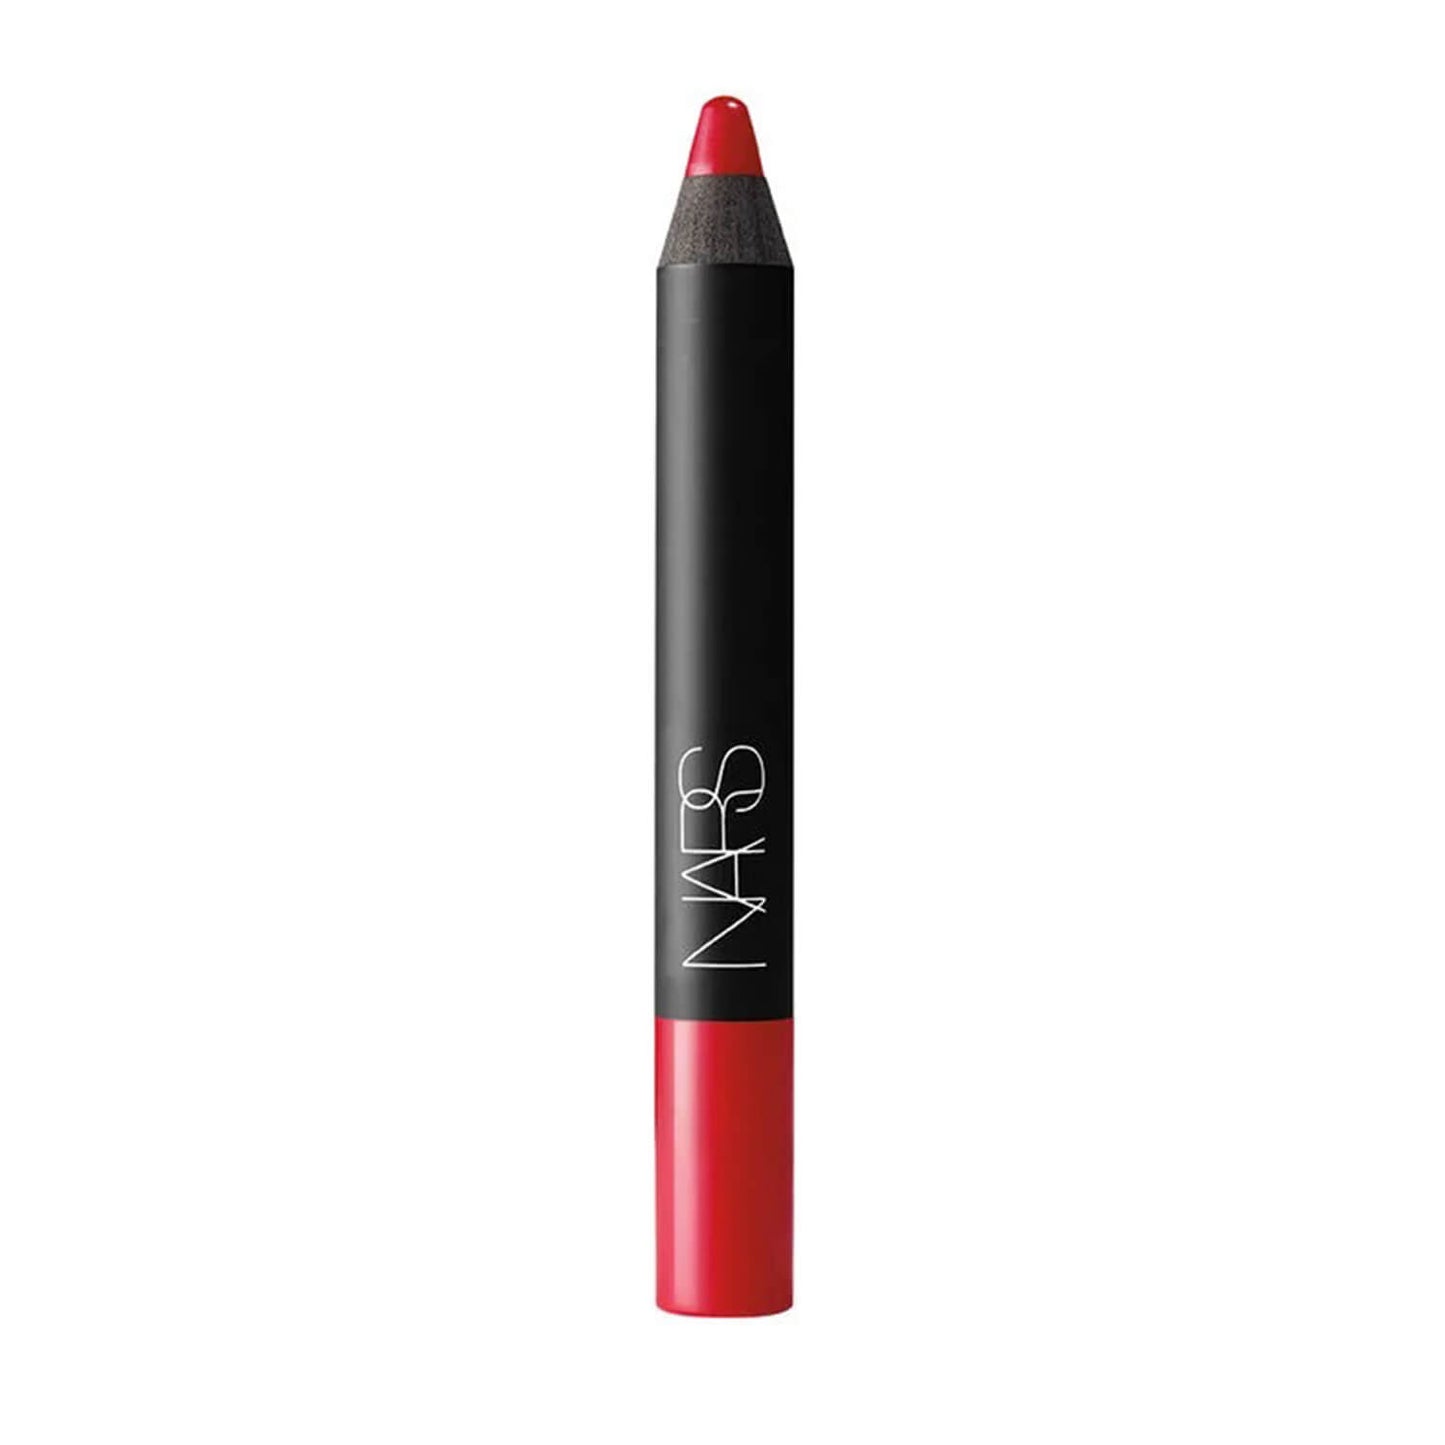 Shop NARS Velvet Matte Lipstick Pencil dragon girl available at Heygirl.pk for delivery in Pakistan